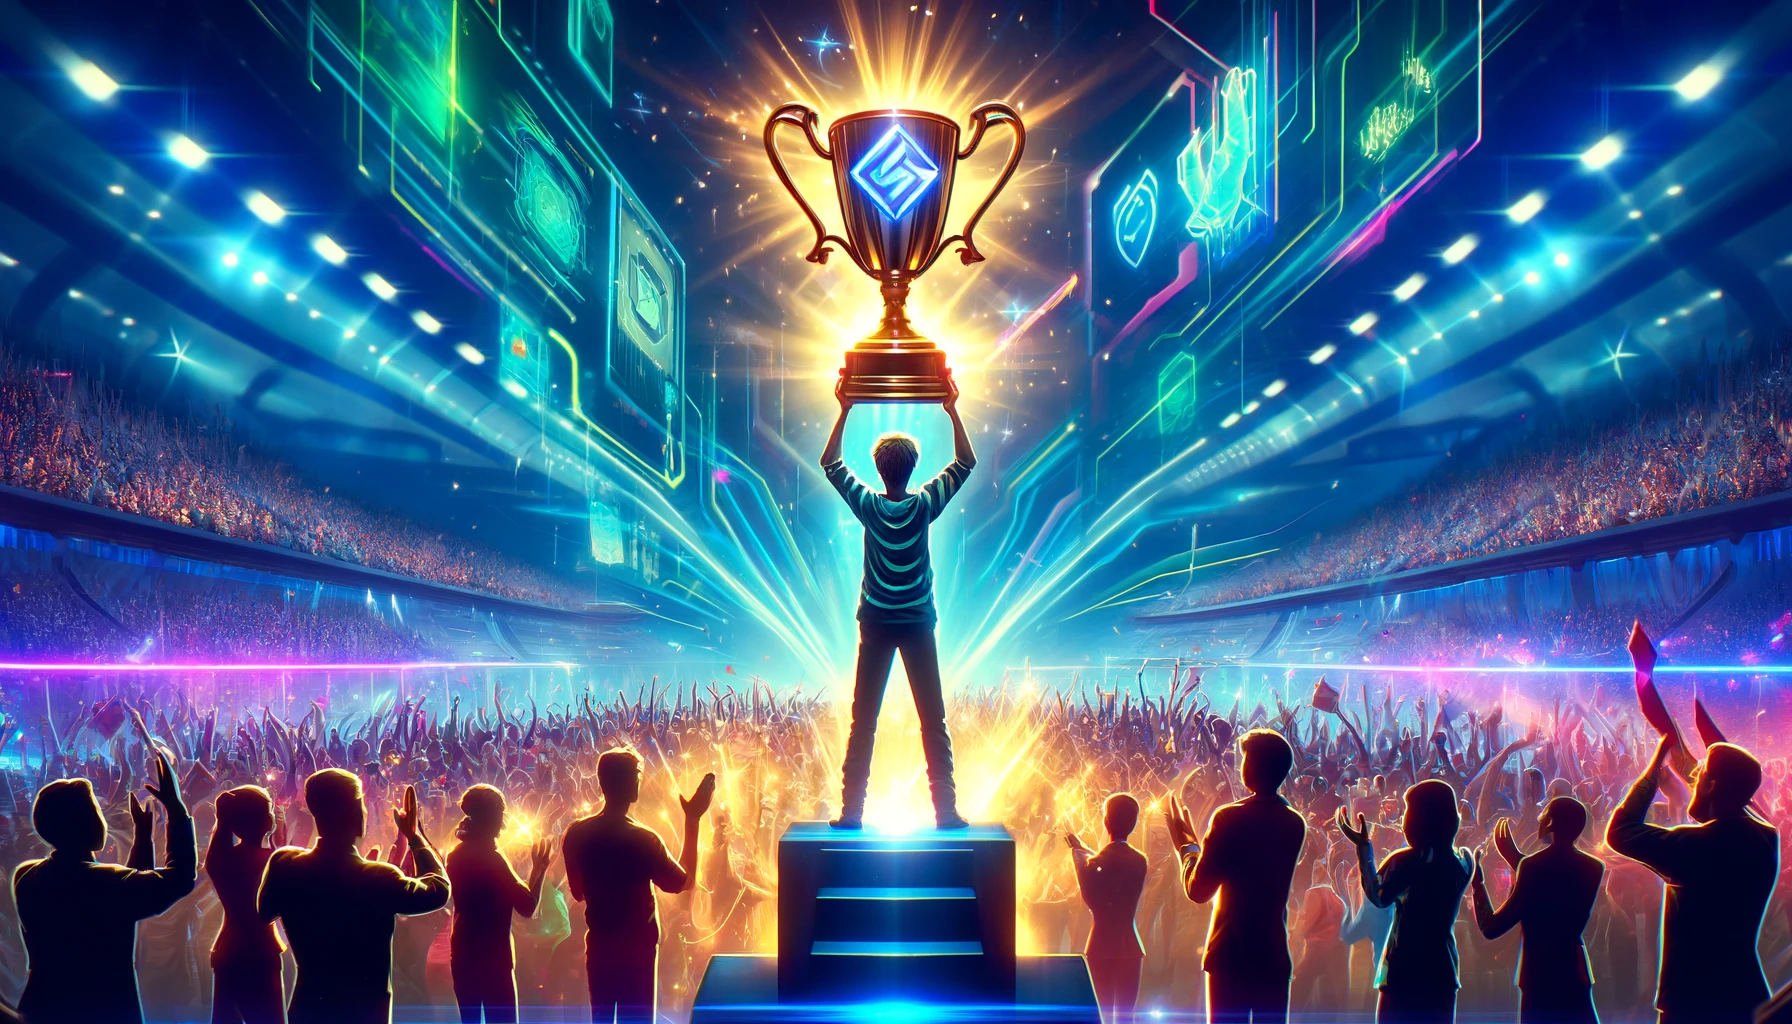 A triumphant player celebrates with a holographic trophy in a vibrant, futuristic stadium.